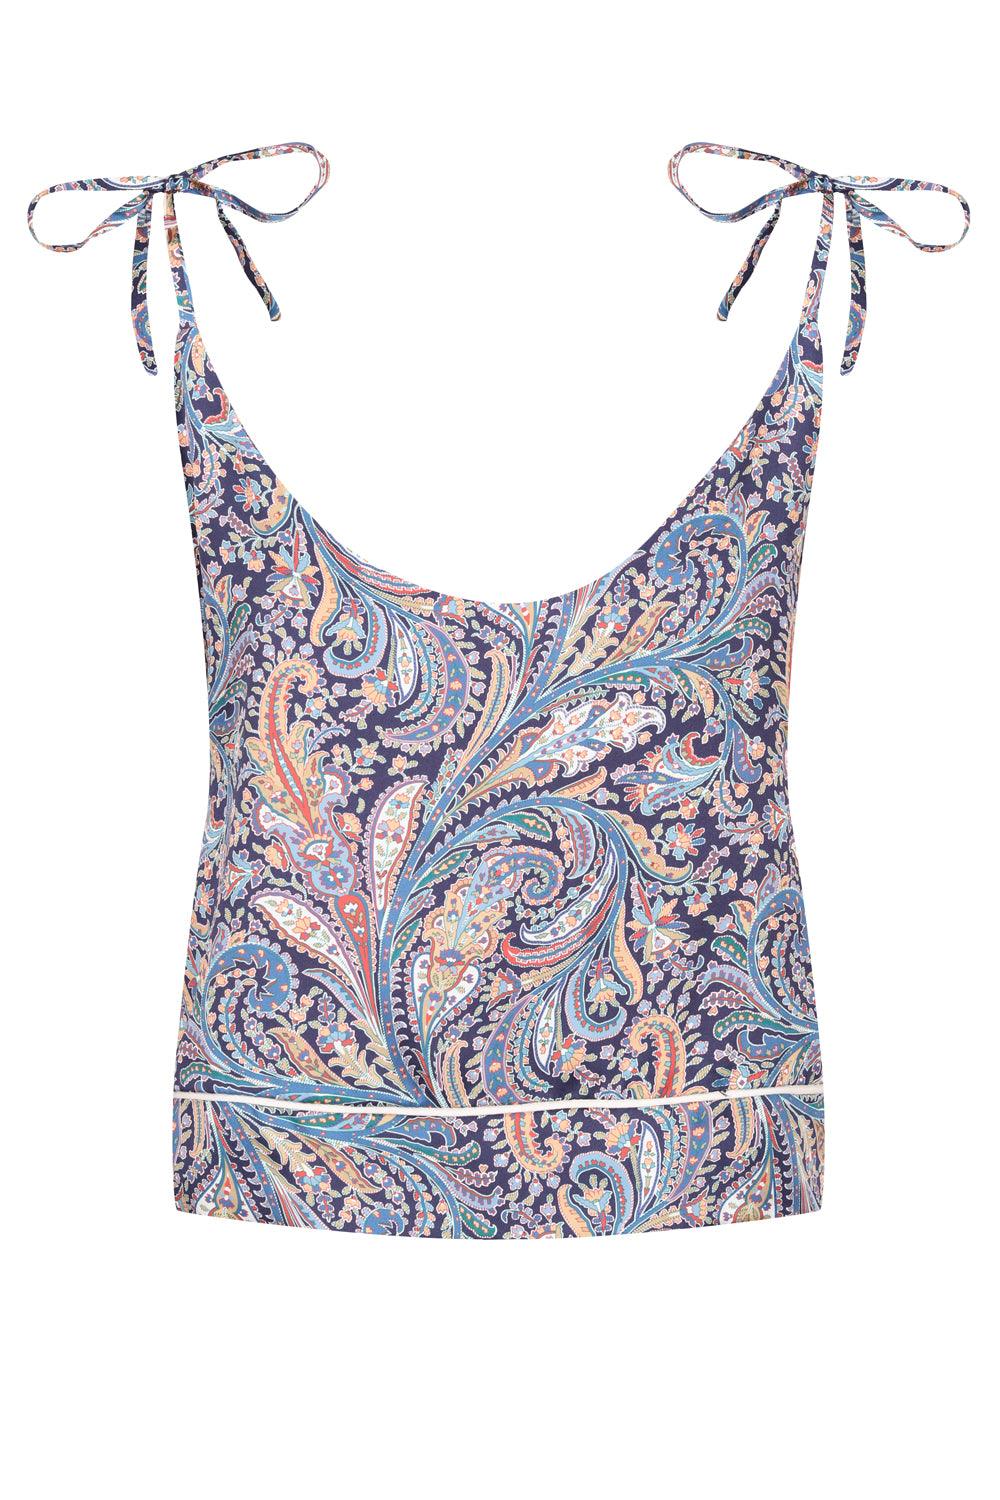 Women's Silk Camisole Top made with Liberty Fabric GREAT MISSENDEN - Coco & Wolf